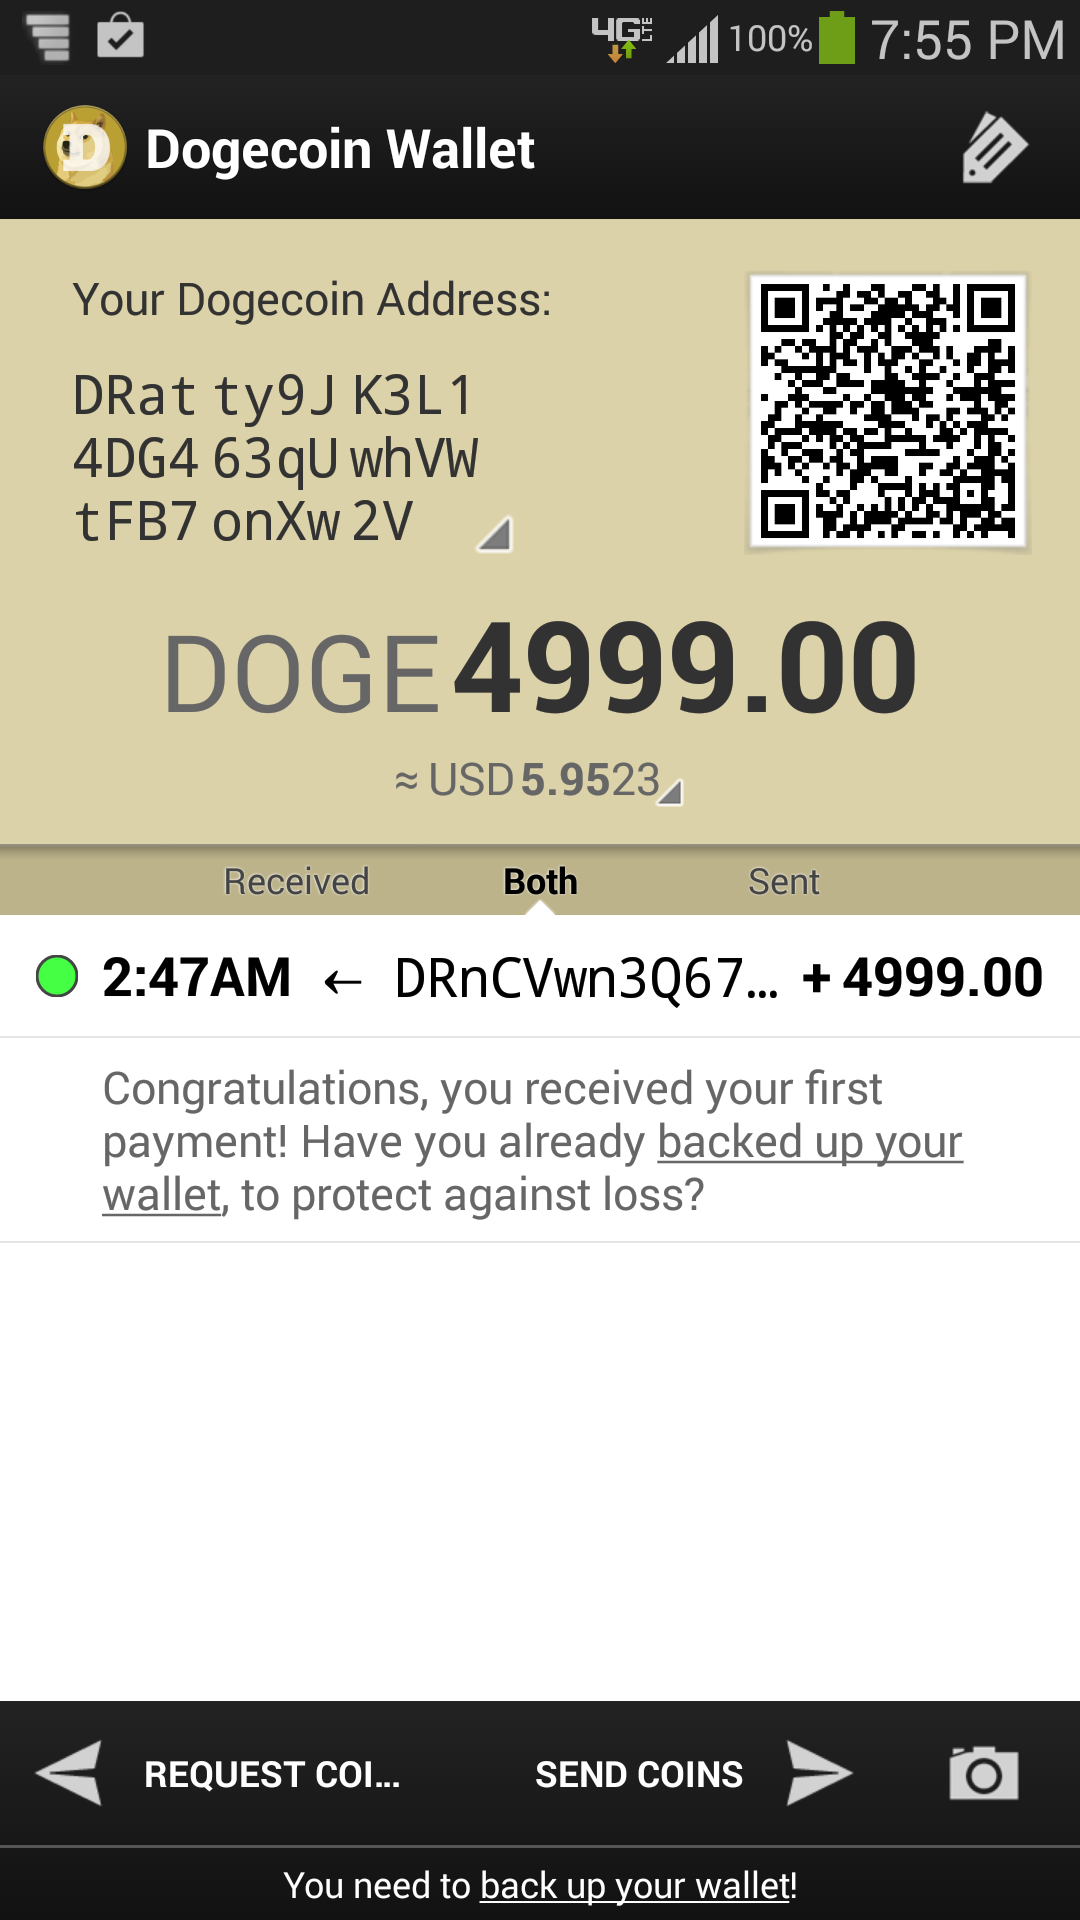 How To Import Private Key With Balance | Swipe Private Key | Dogecoin wallet, Private, Balance